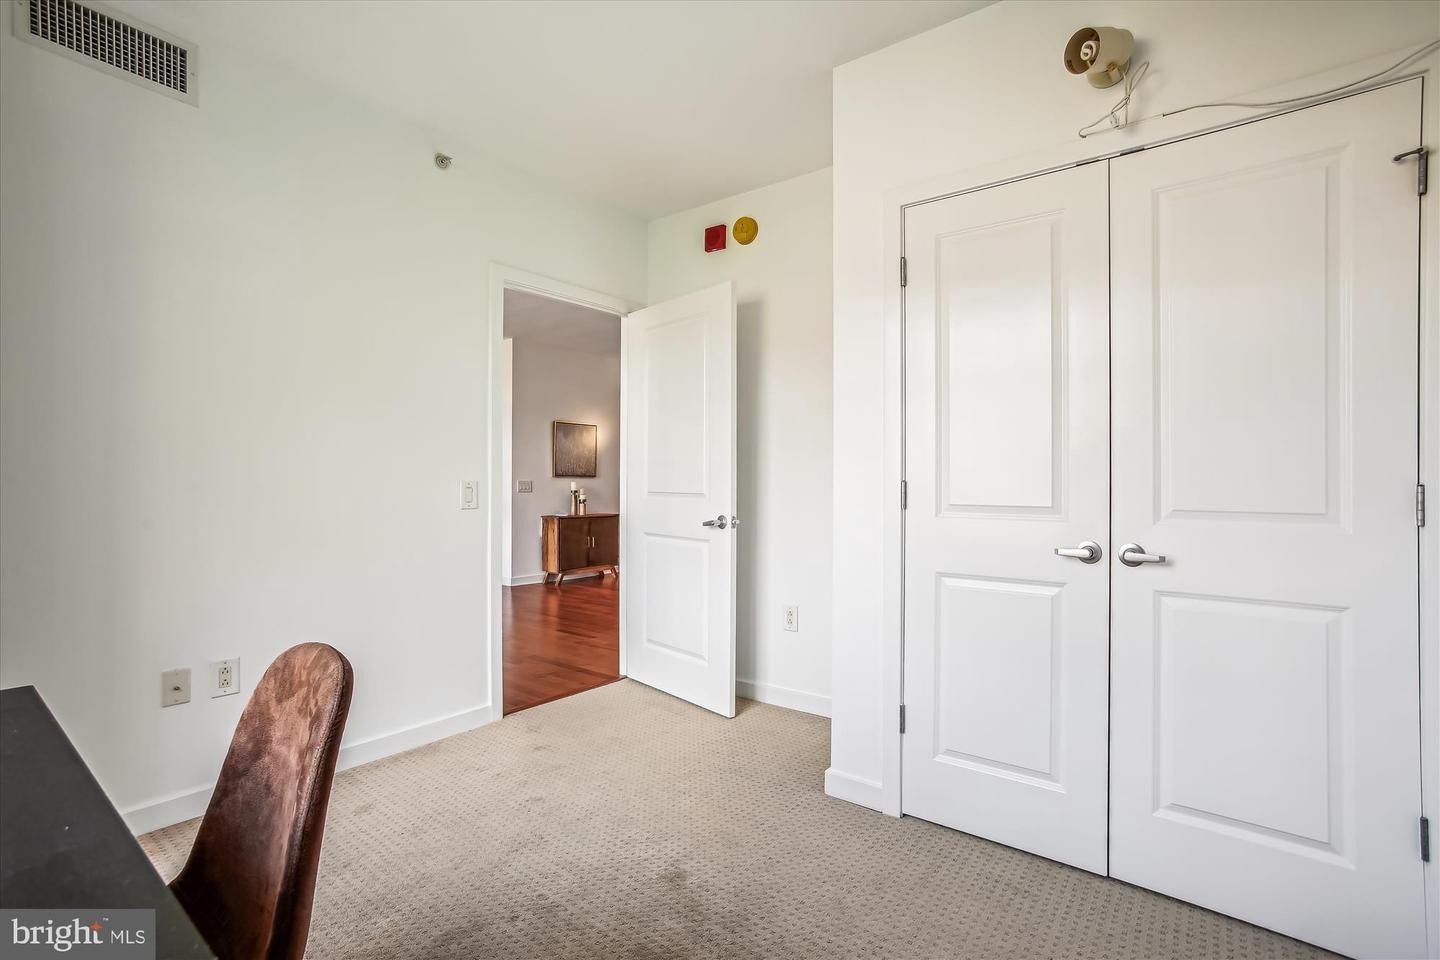 23. 475 K St NW 